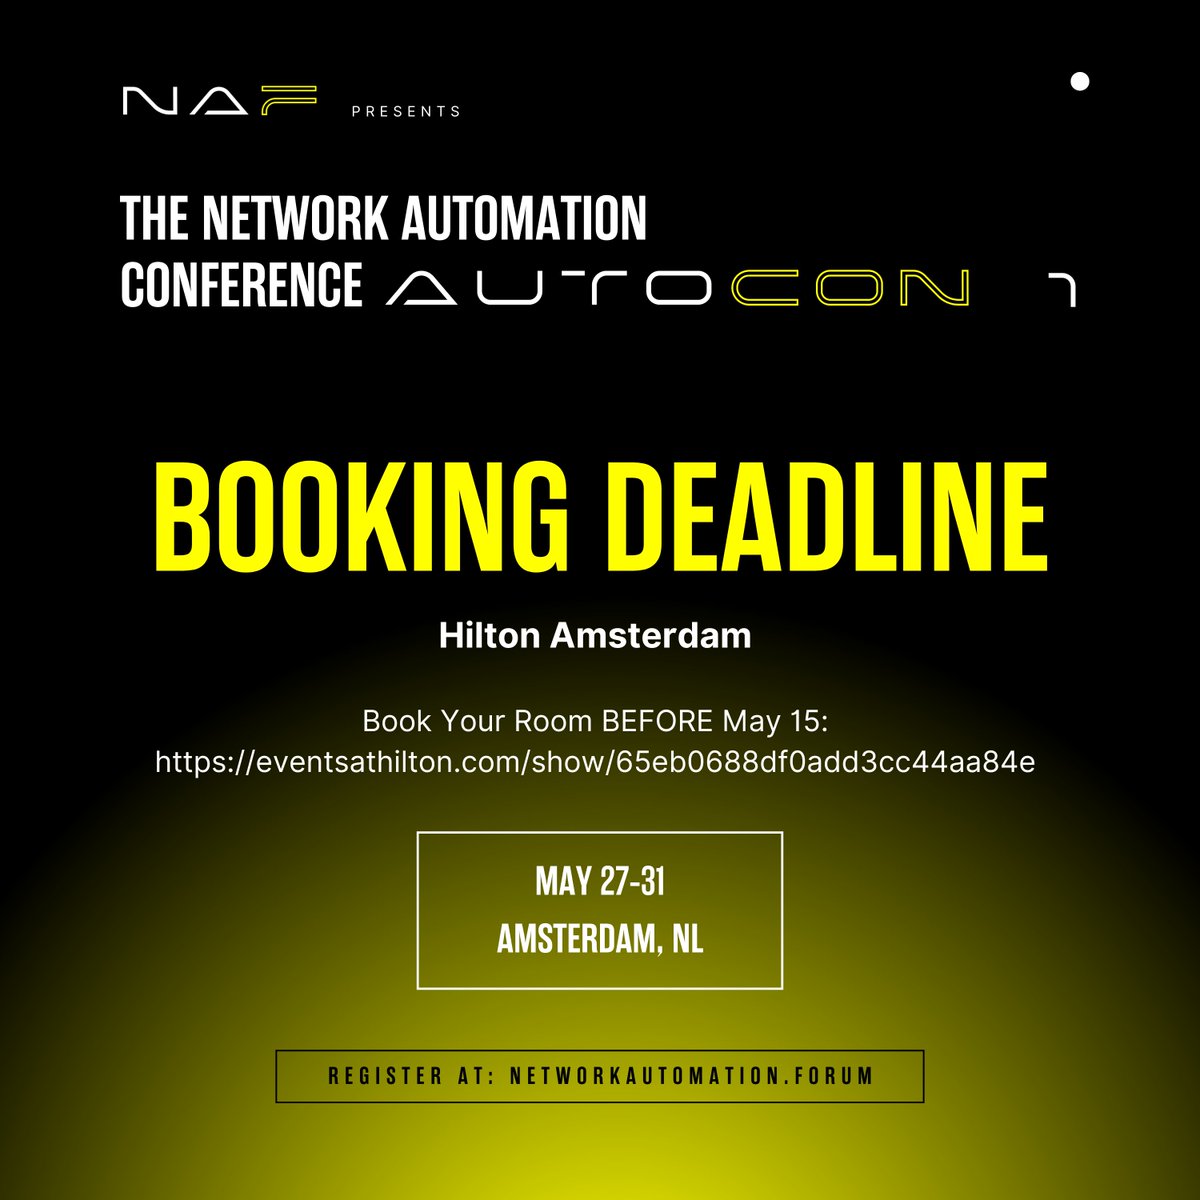 🚨Booking Deadline🚨 Have you booked your hotel stay for #AutoCon1 in #Amsterdam? If not, now is the time! The booking deadline is May 15th. 
💻 Register: networkautomation.forum/autocon1#regis…
🏨Hotel stay: networkautomation.forum/autocon1#venue
✈️ See you soon! 
linkedin.com/company/networ…

#networkautomation